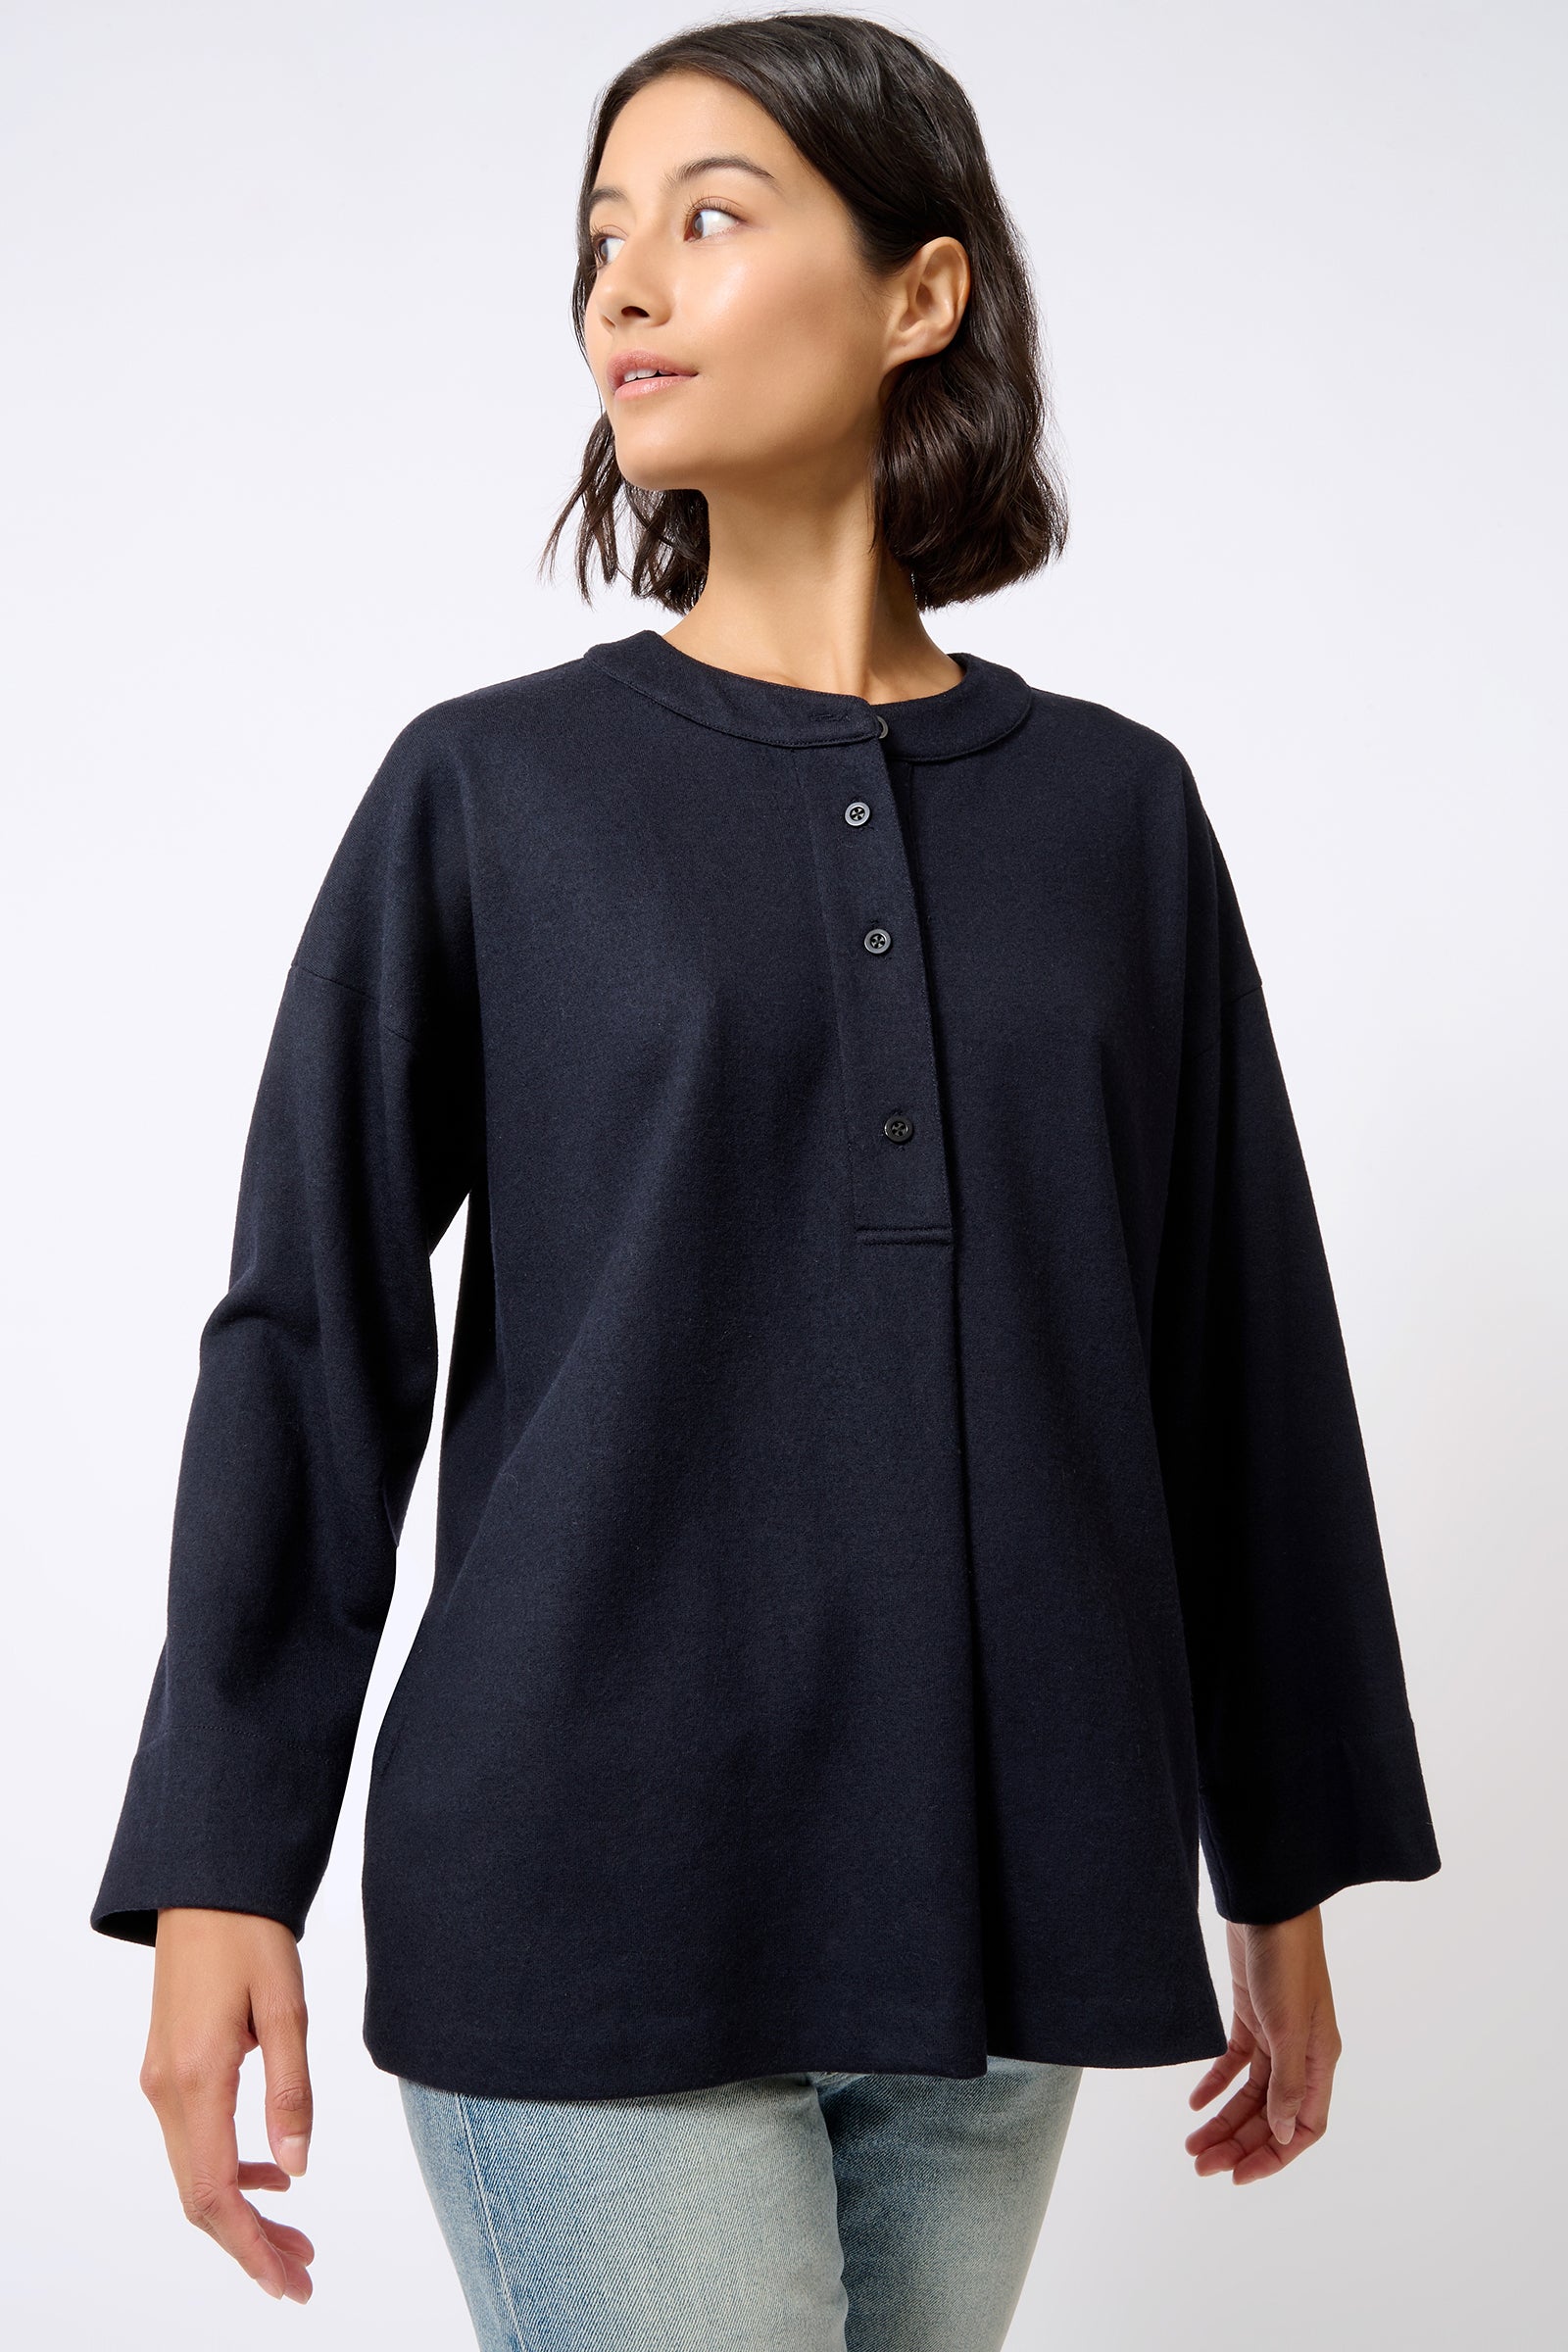 Kal Rieman Band Collar Top in Midnight on Model with Hand on Hip Front View